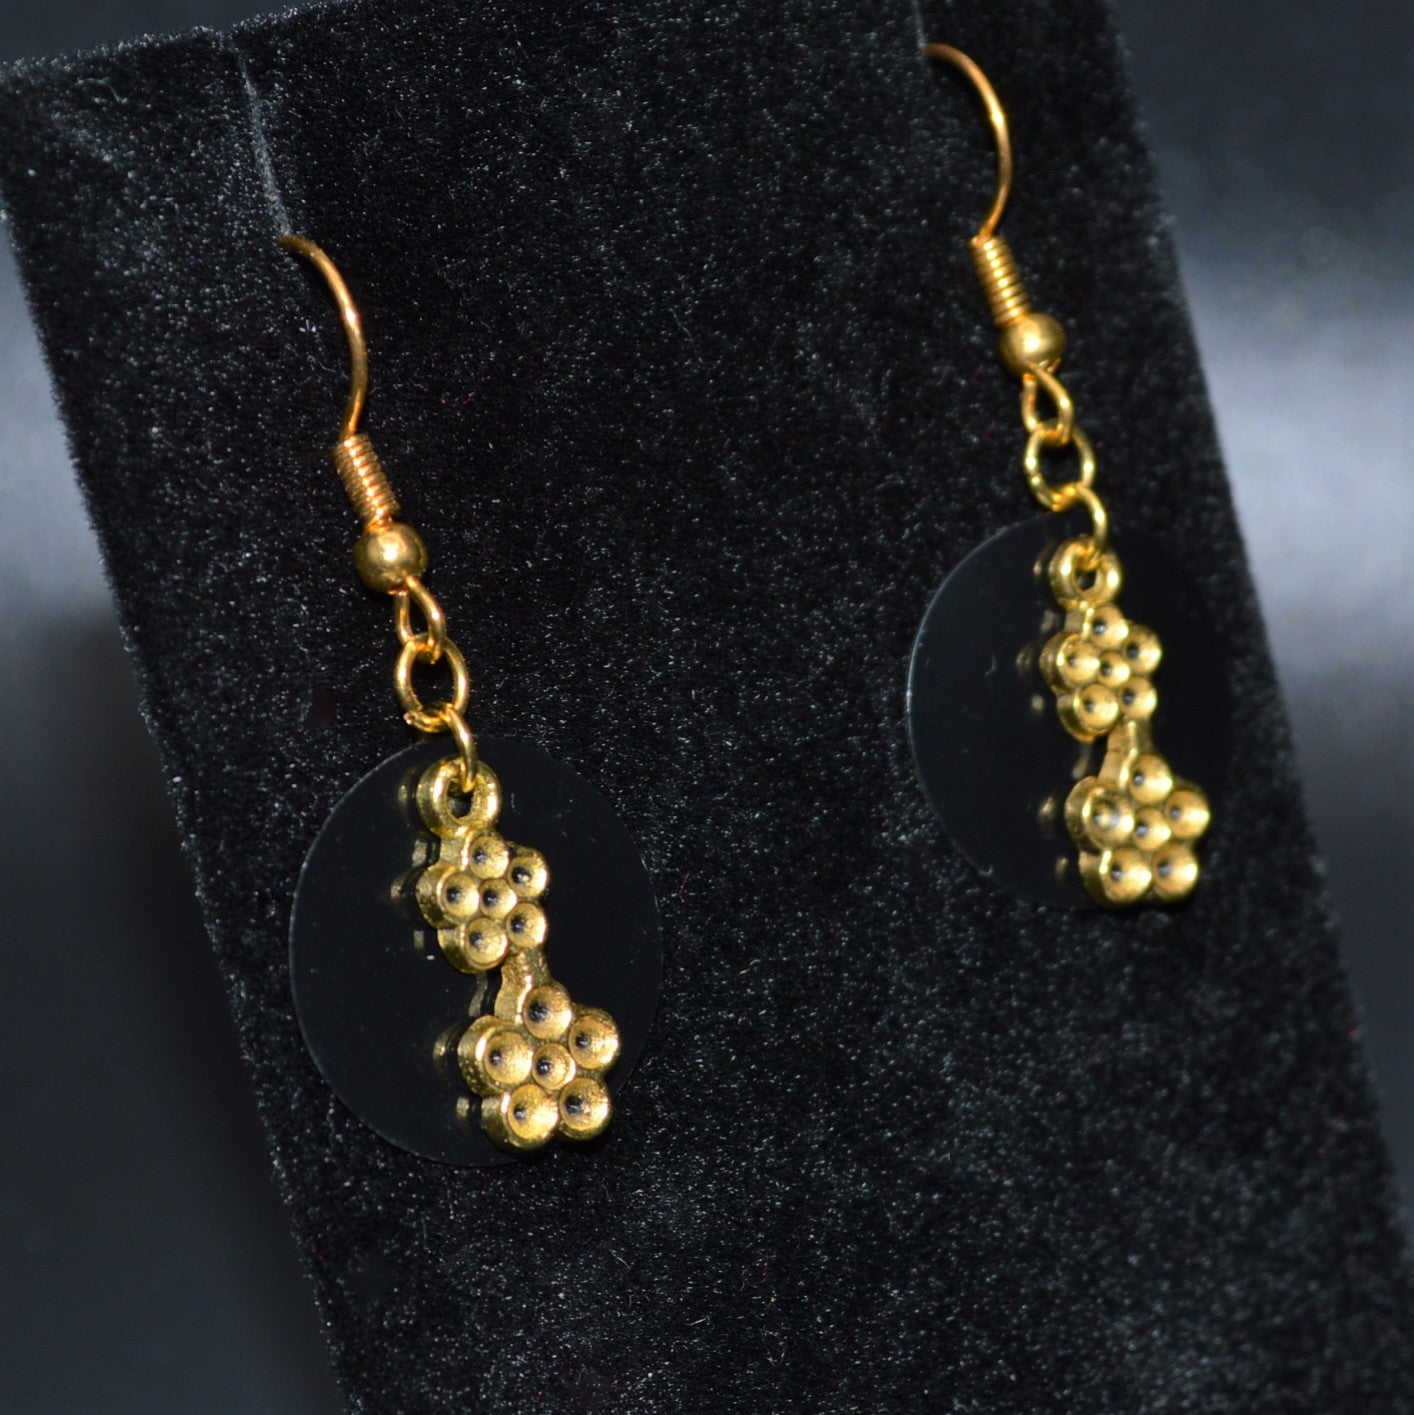 Antique Gold Flower Earrings (with Black Circle)